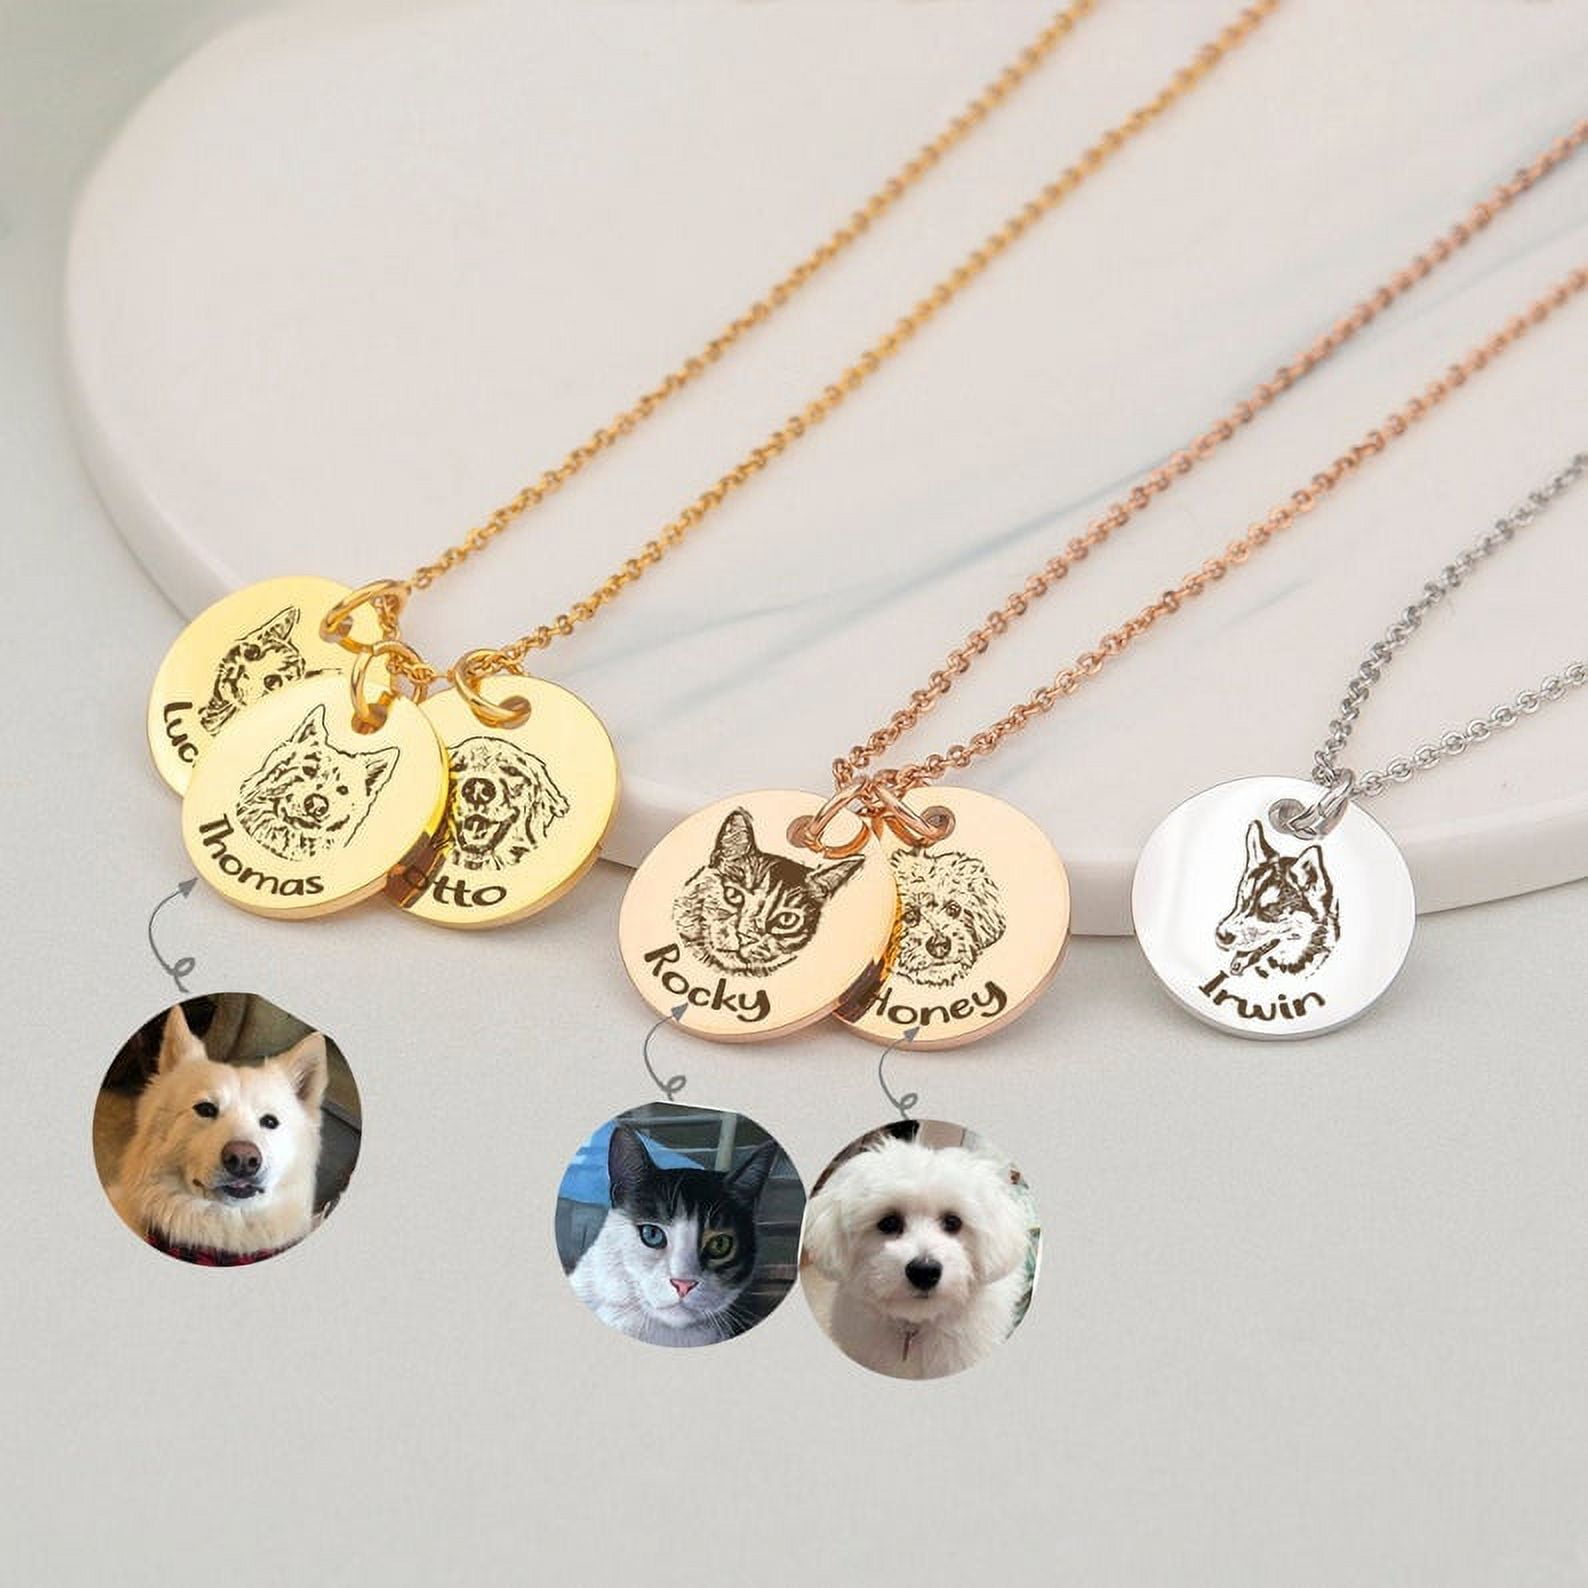 Buy Custom Pet Necklace Online In India - Etsy India